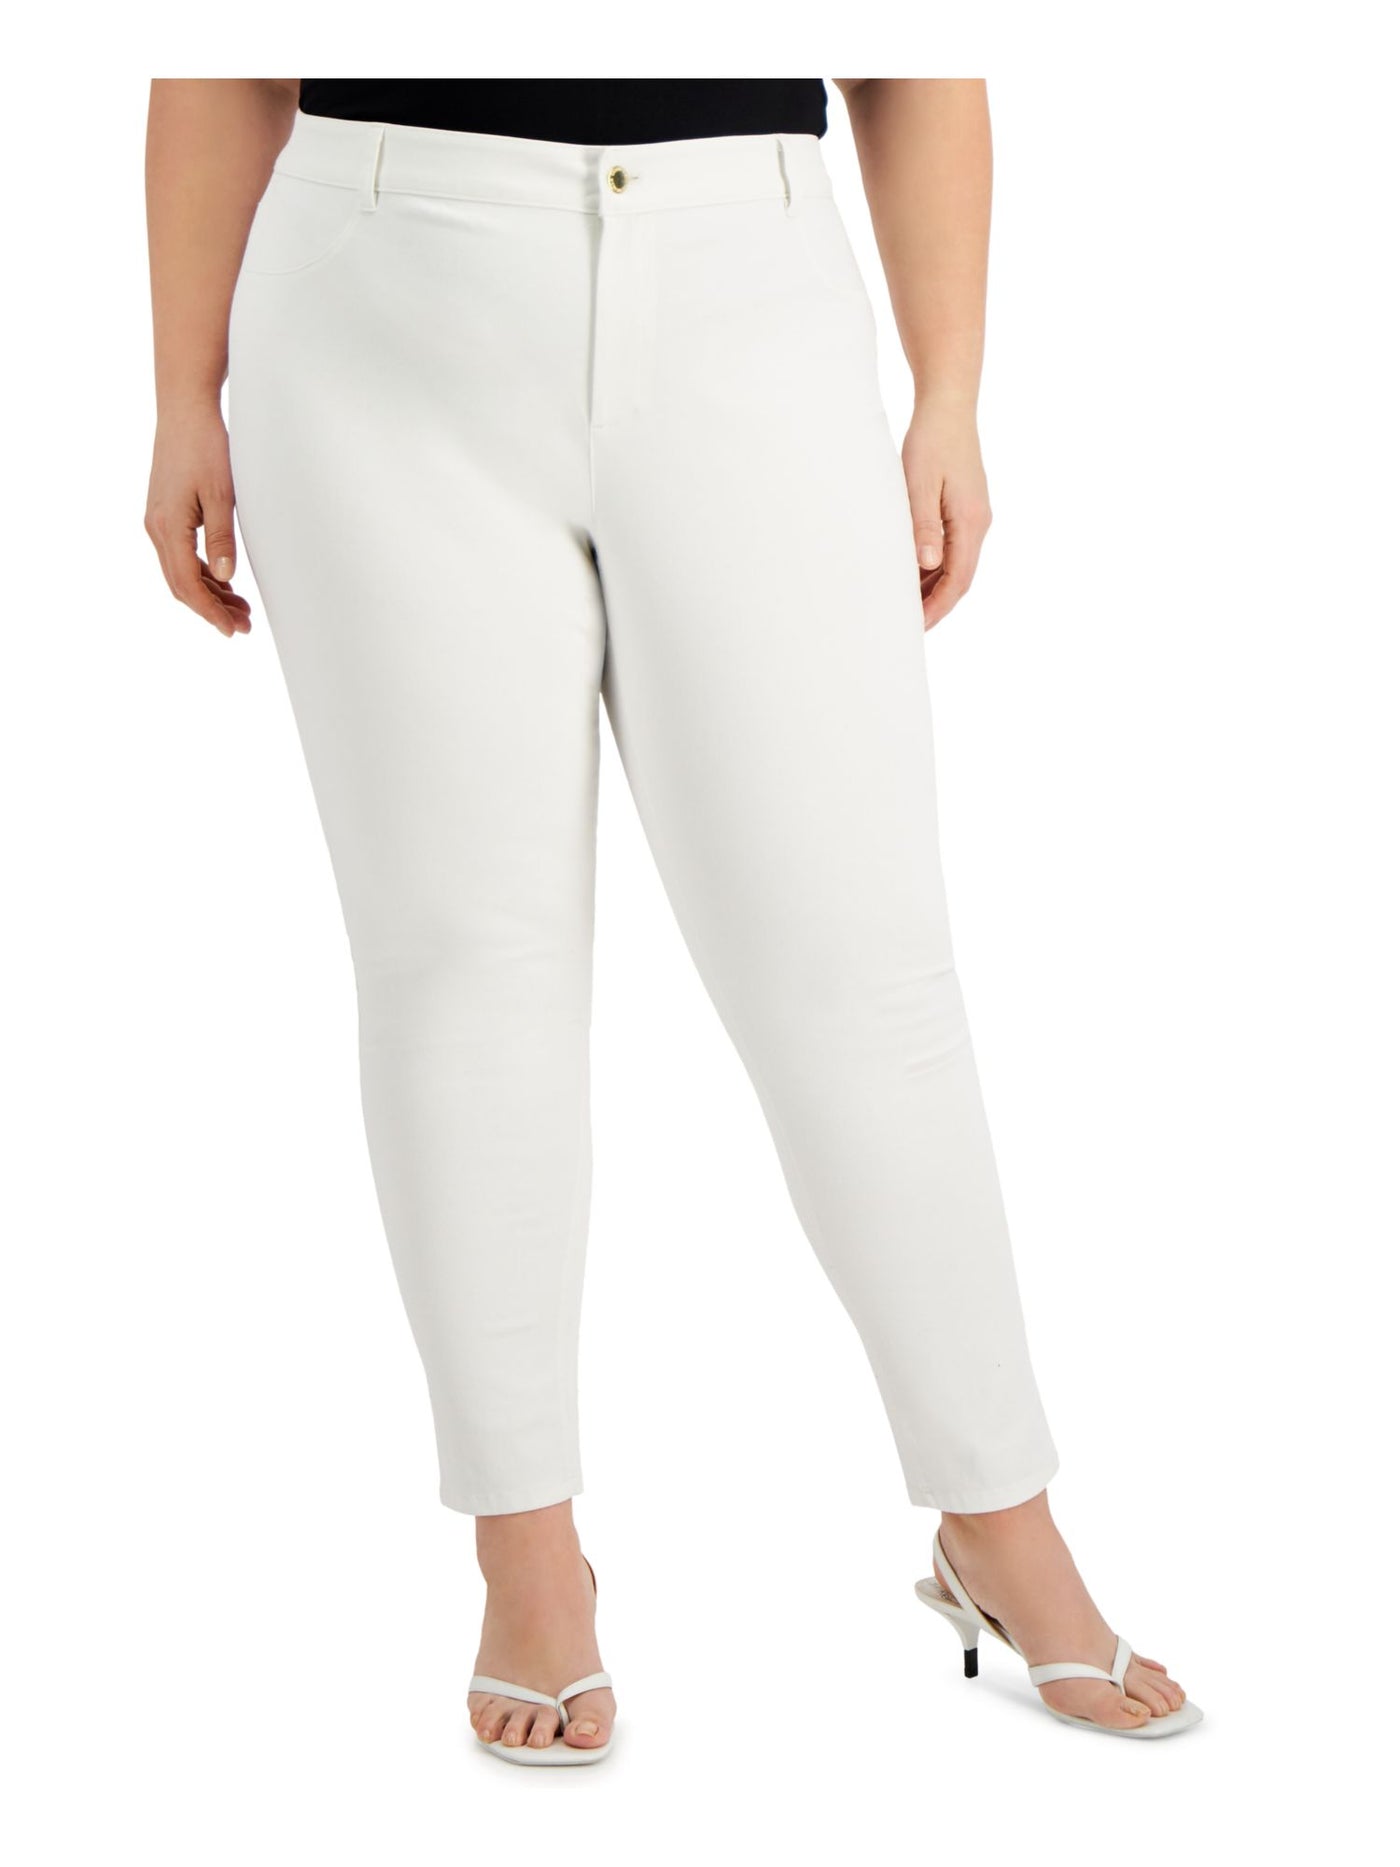 CALVIN KLEIN Womens White Stretch Pocketed Zippered Twill Mid-rise Slim Skinny Pants Plus 14W